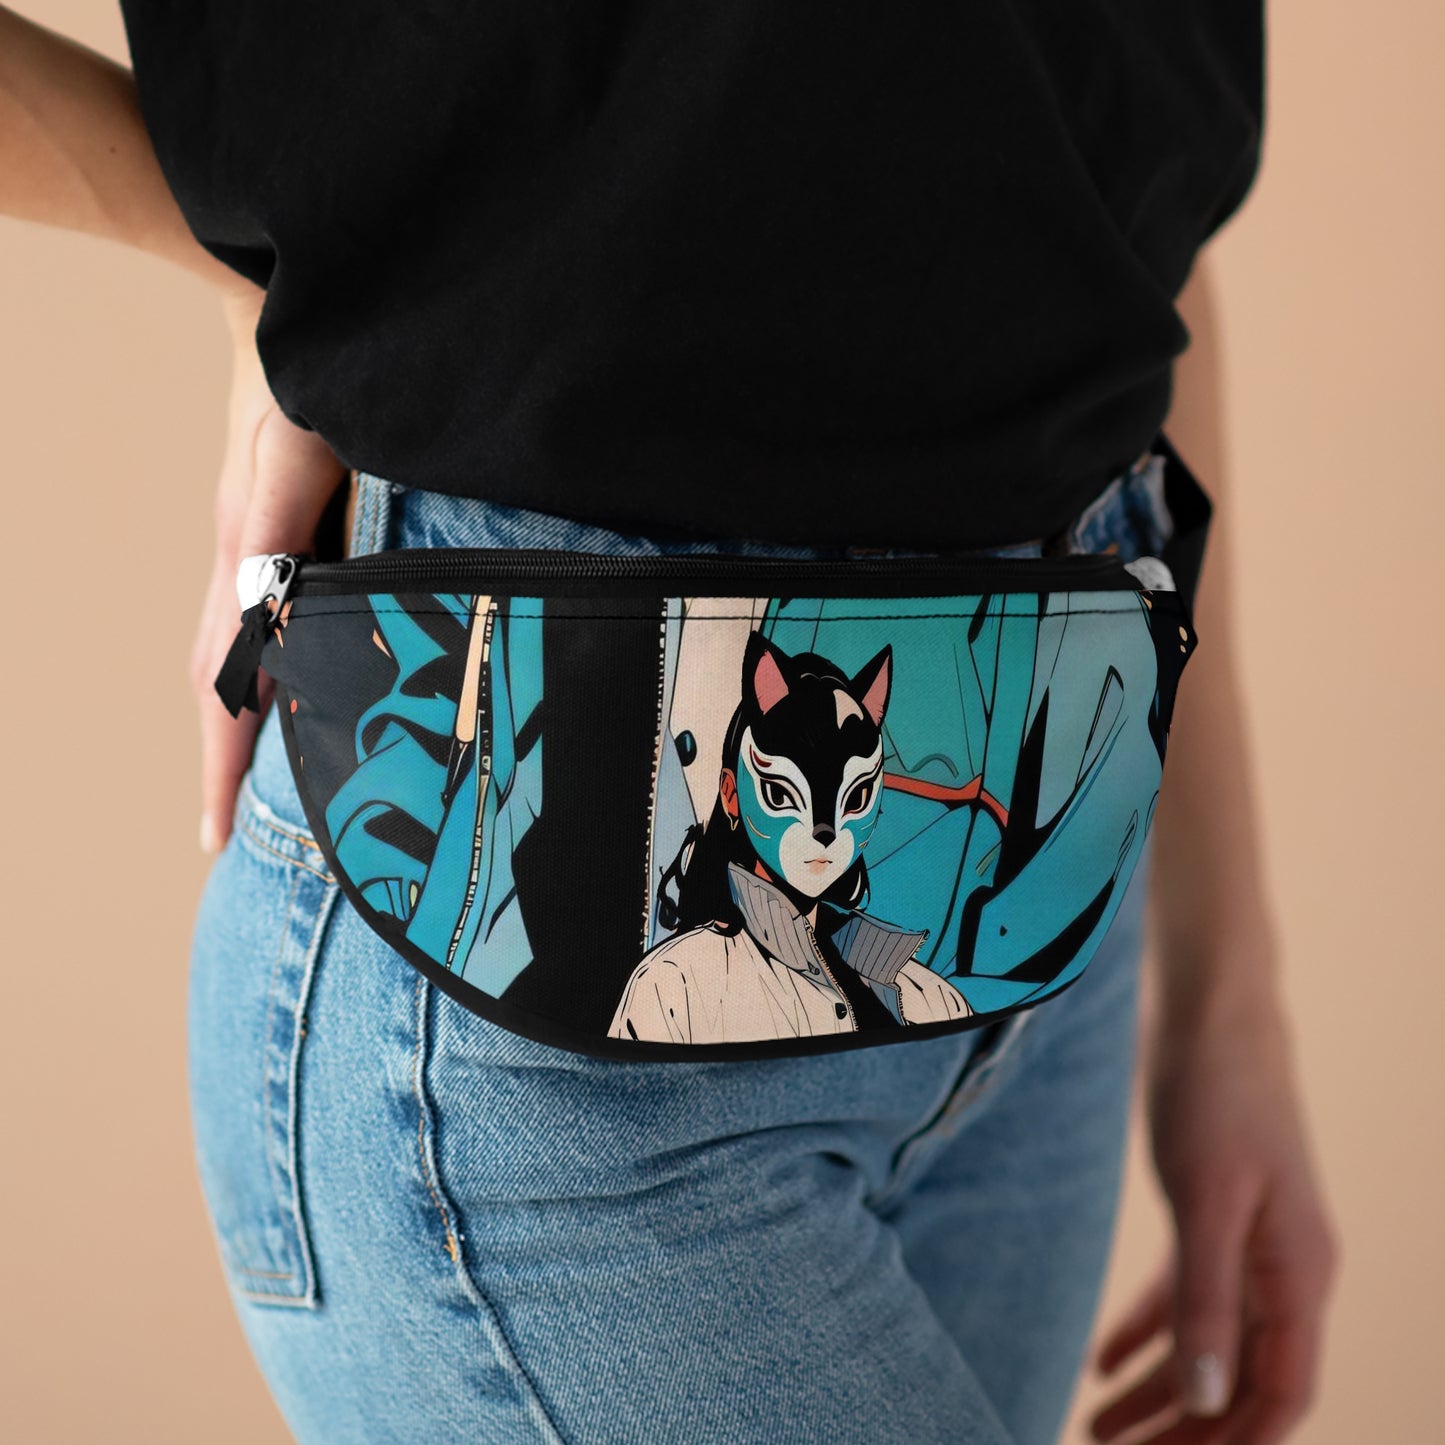 Anime Style Art Fanny Pack- "The Stray Kat"